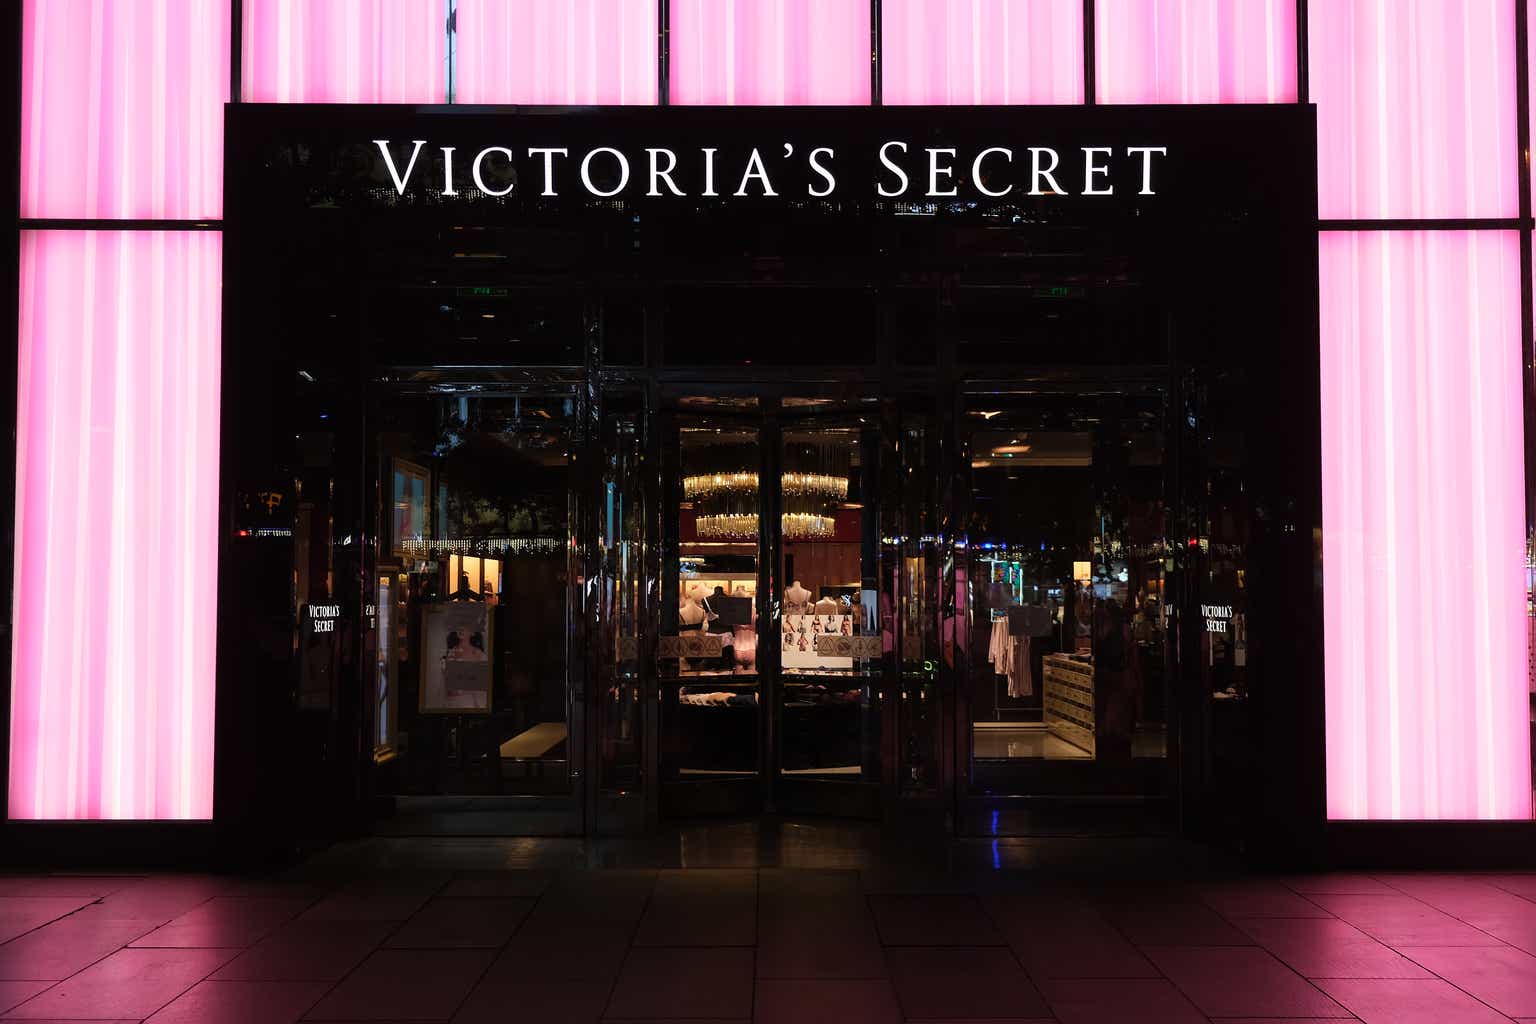 5 ways Victoria's Secret is using AI to improve online shopping